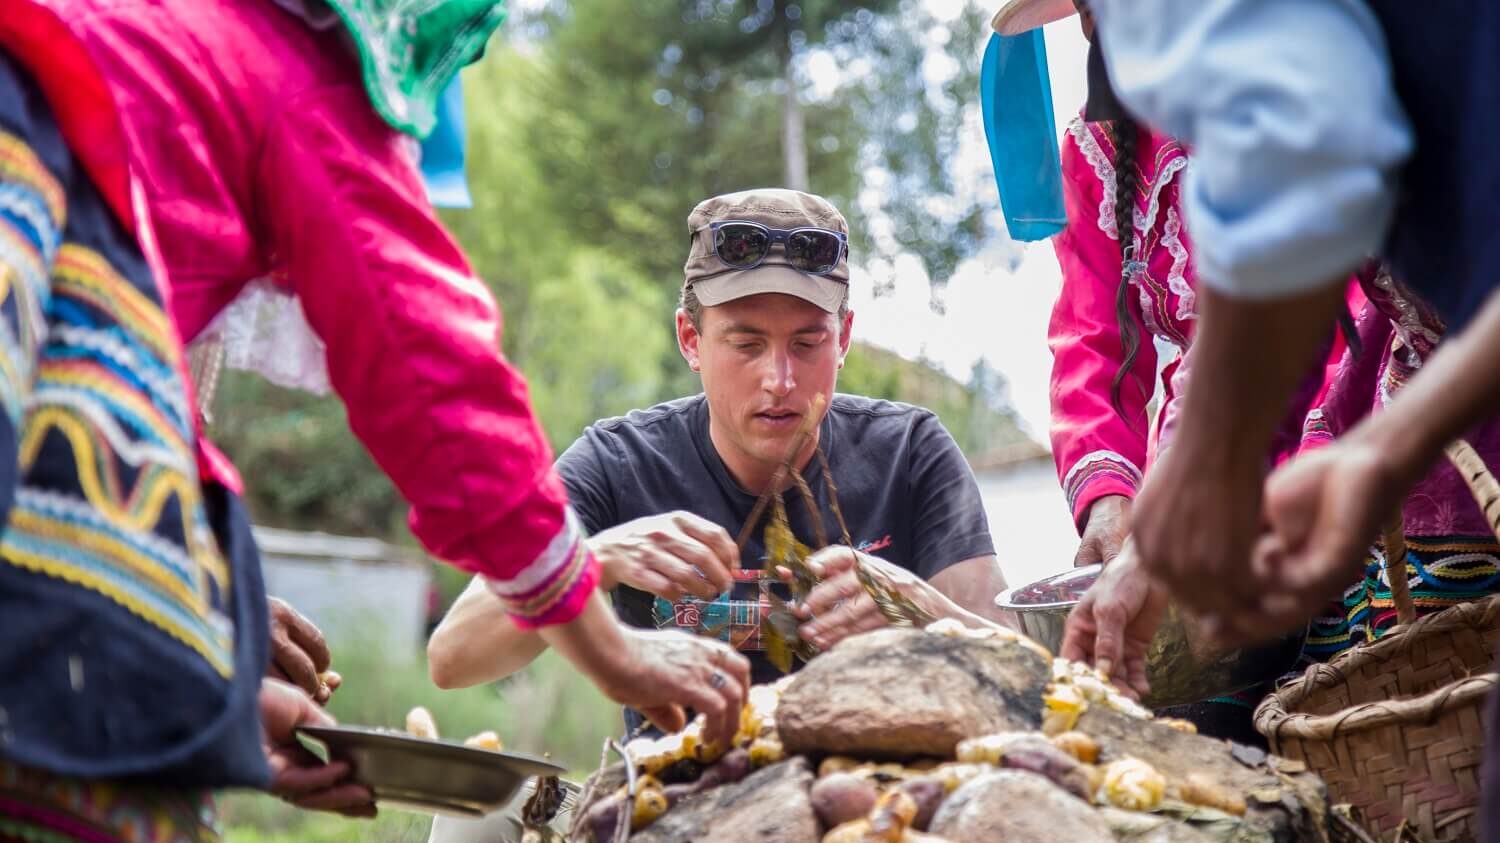 Guido assisting the locals in Vicos with opening the Pachamanca and gathering the freshly cooked potatoes. Community-Based Tourism in the Andes - RESPONSible Travel Peru